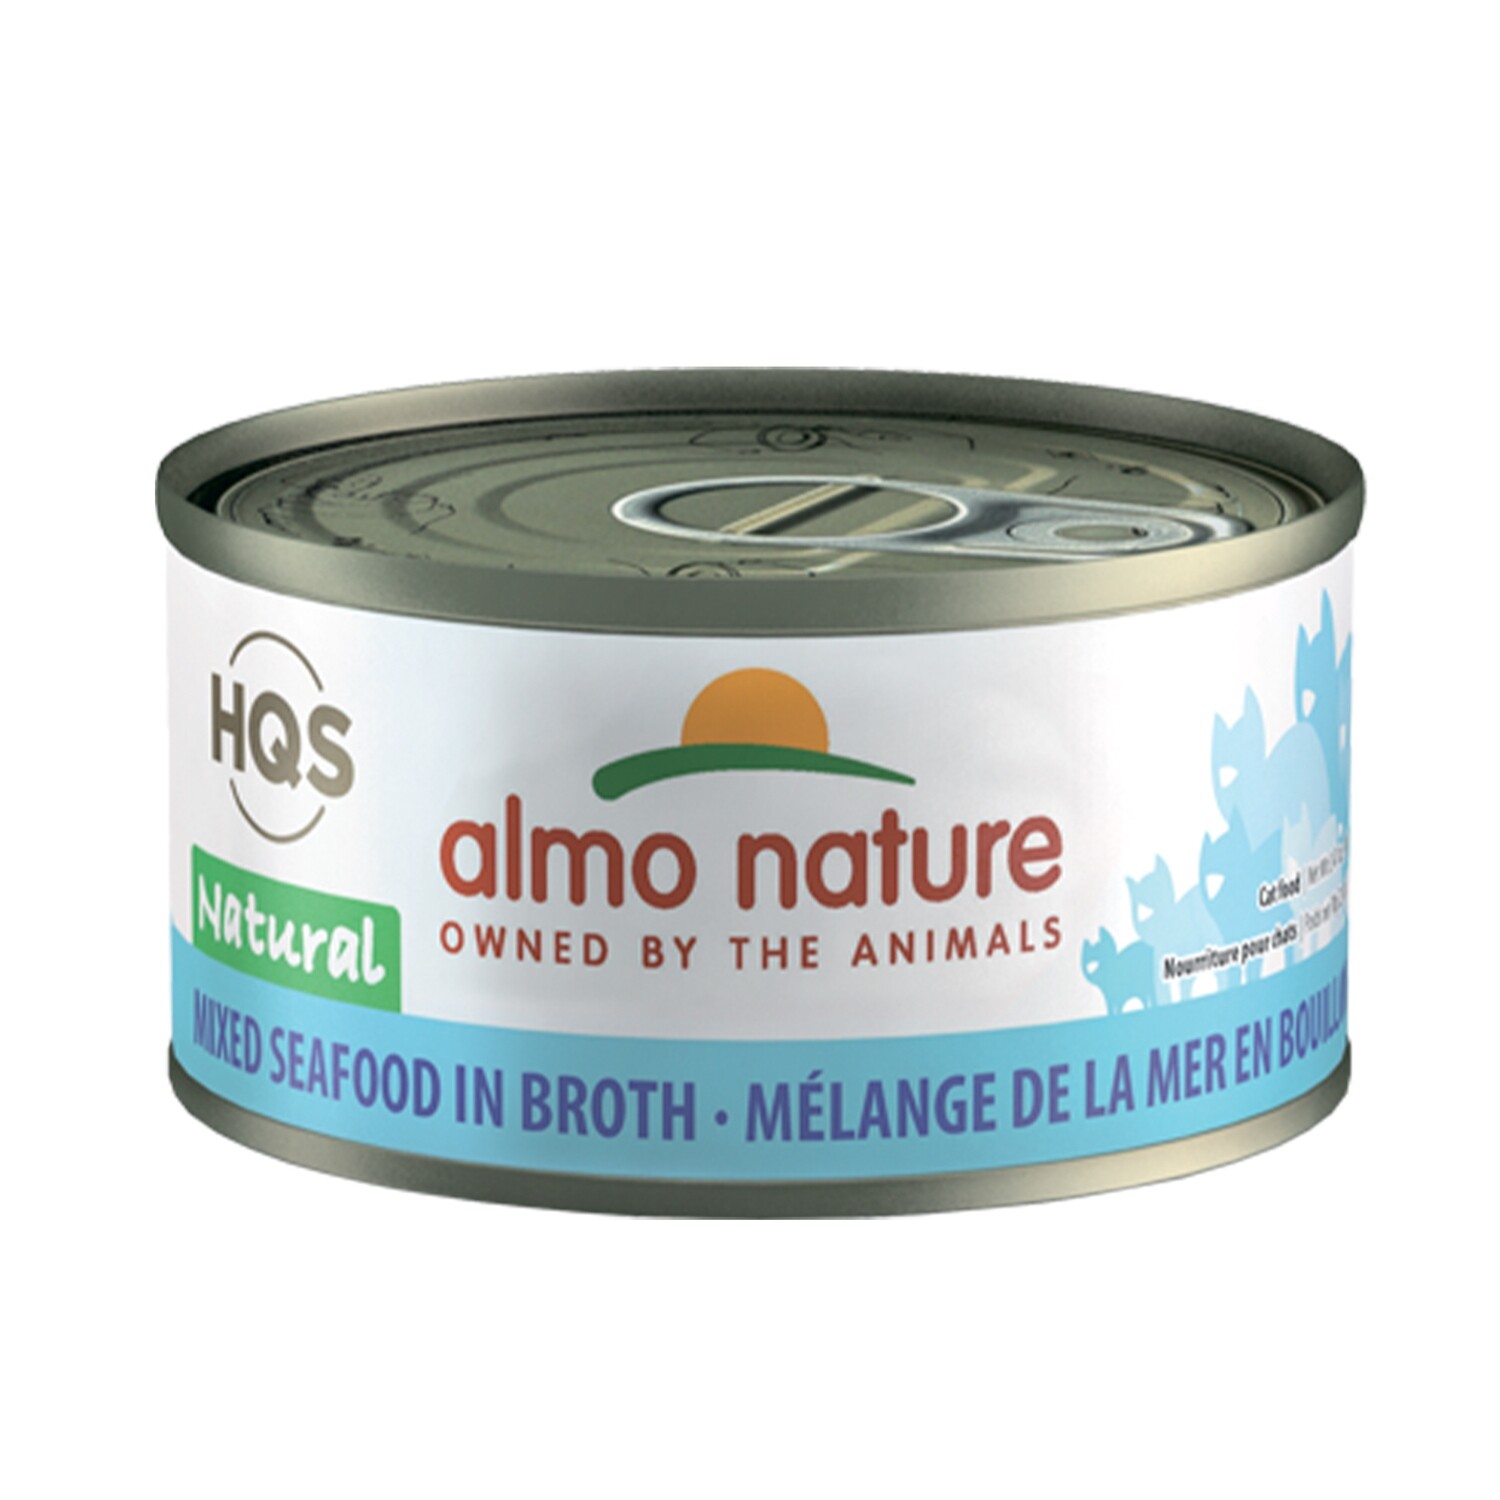 Almo Nature HQS Mixed Seafood Canned Cat Food-70g/2.5oz - 海鲜猫罐头